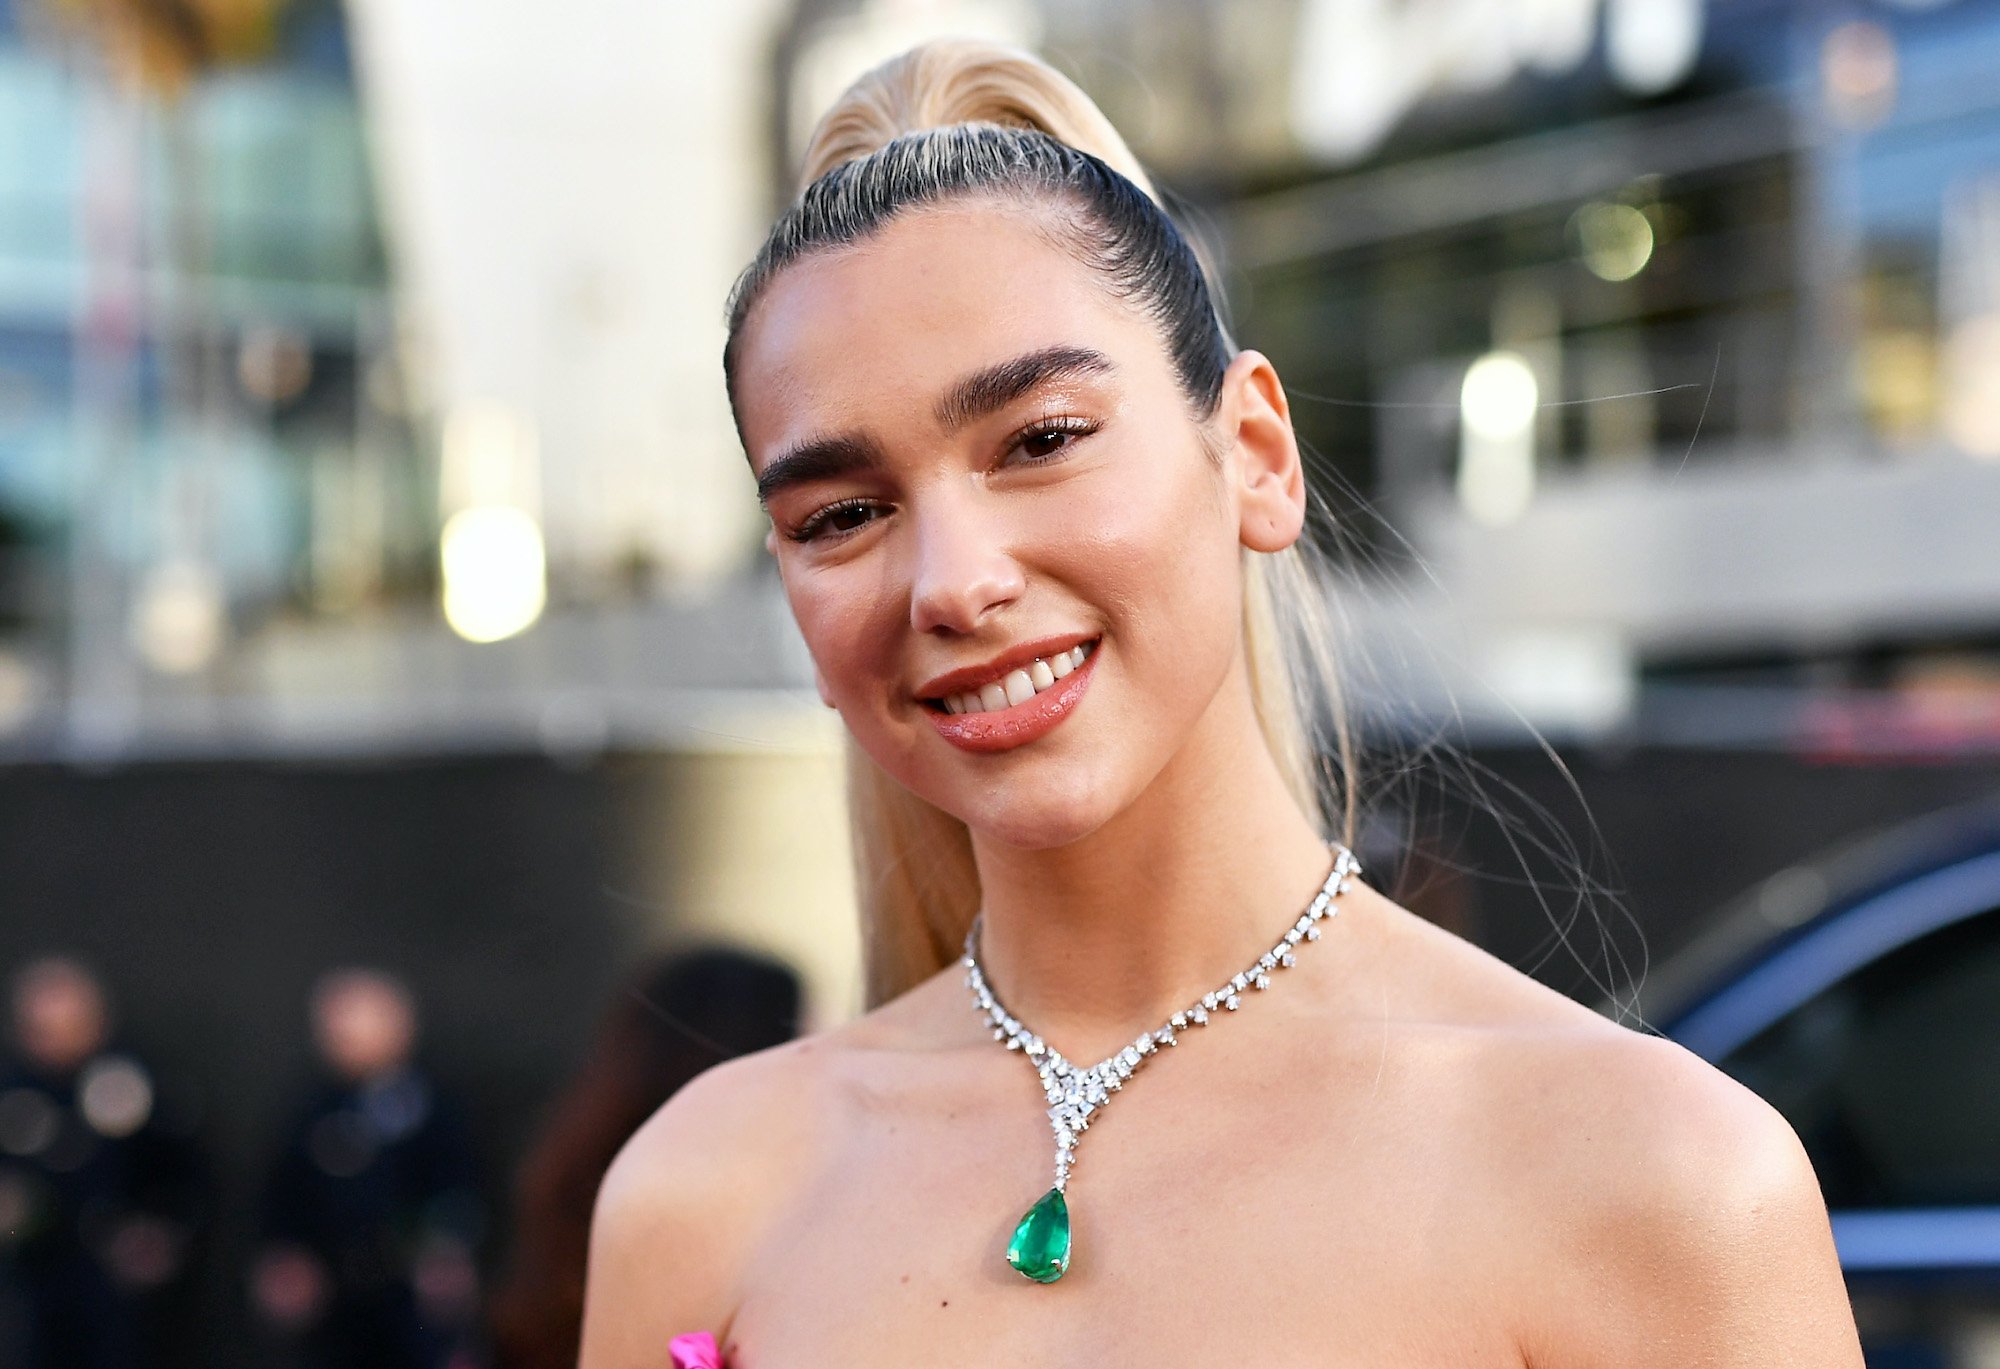 Dua Lipa smiling in front of a blurred background